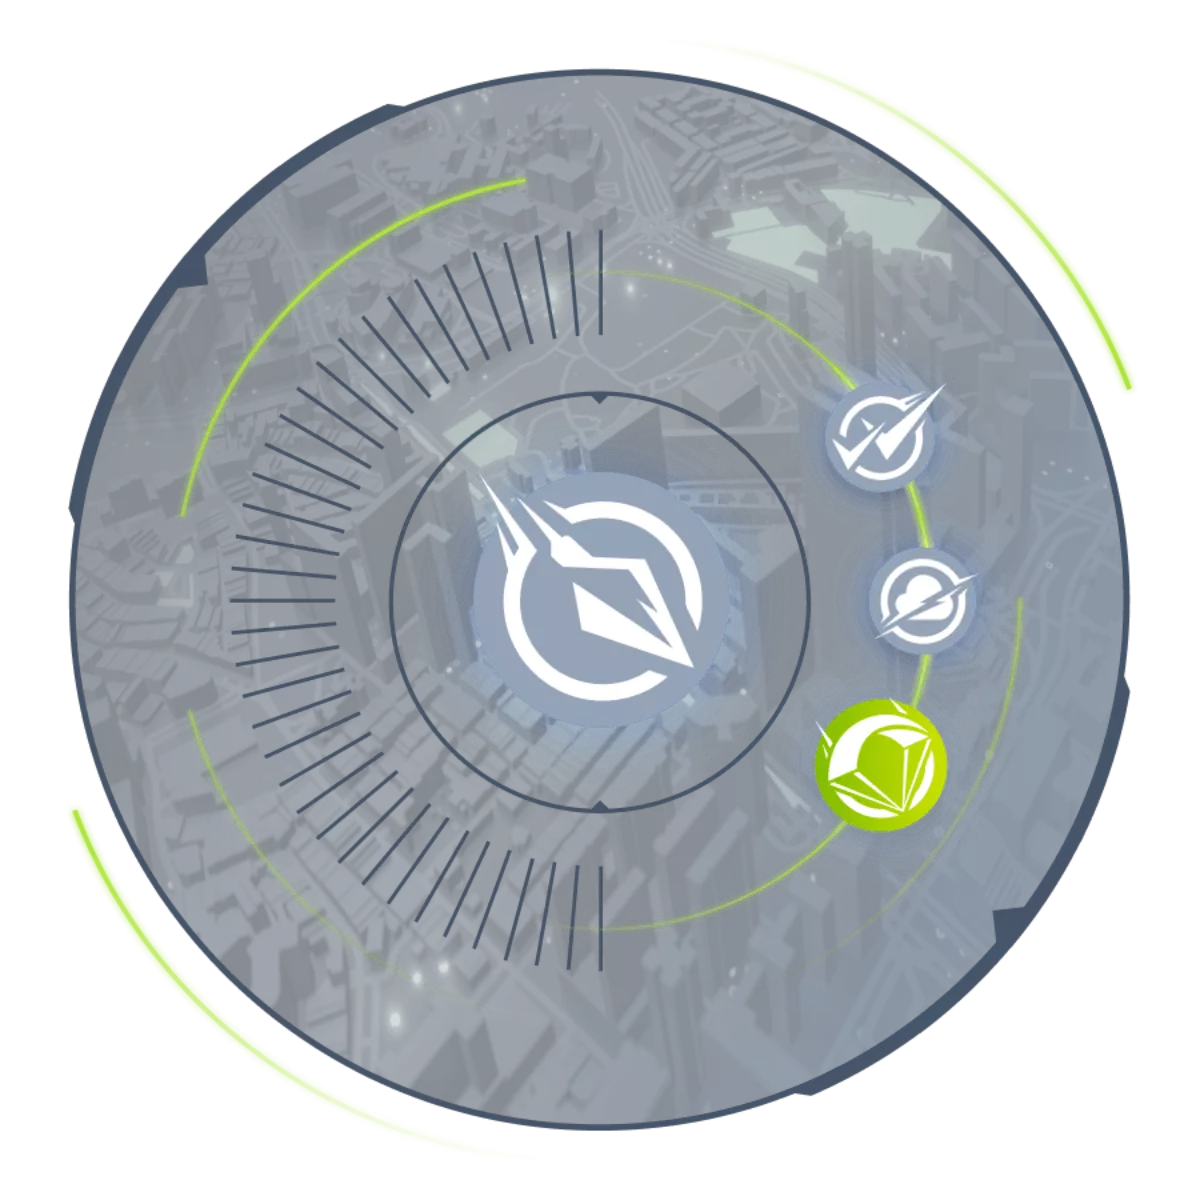 Ecosystem graphic showing Blackpoint RISK icon highlighted